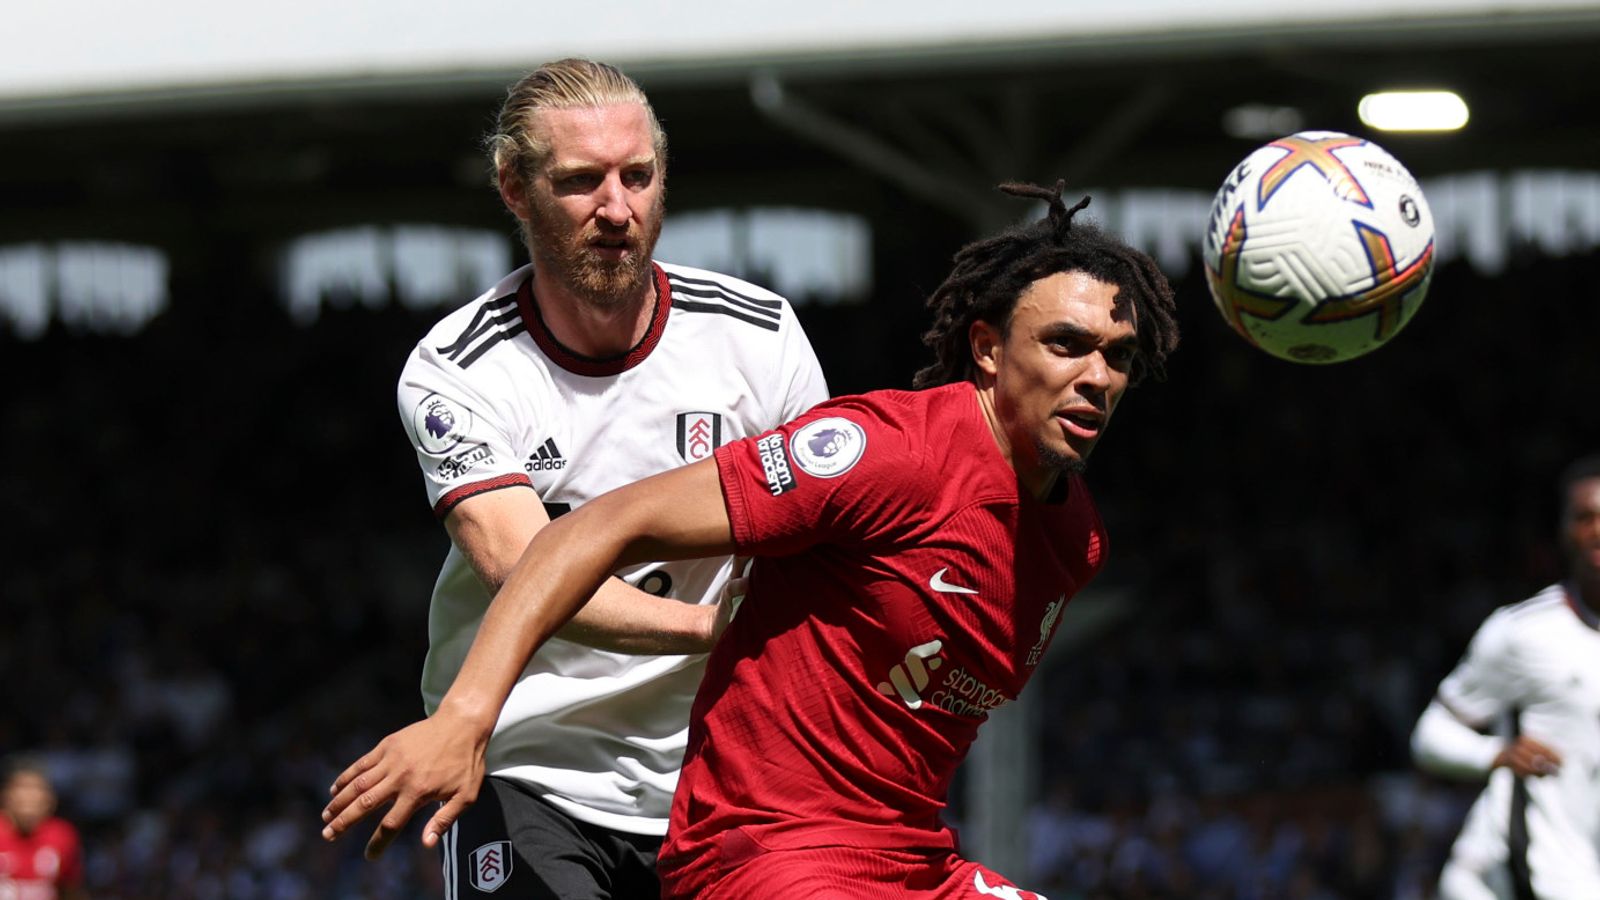 Gary Neville: Trent Alexander-Arnold must redress imbalance in his game – but it’s not a time to give up on him